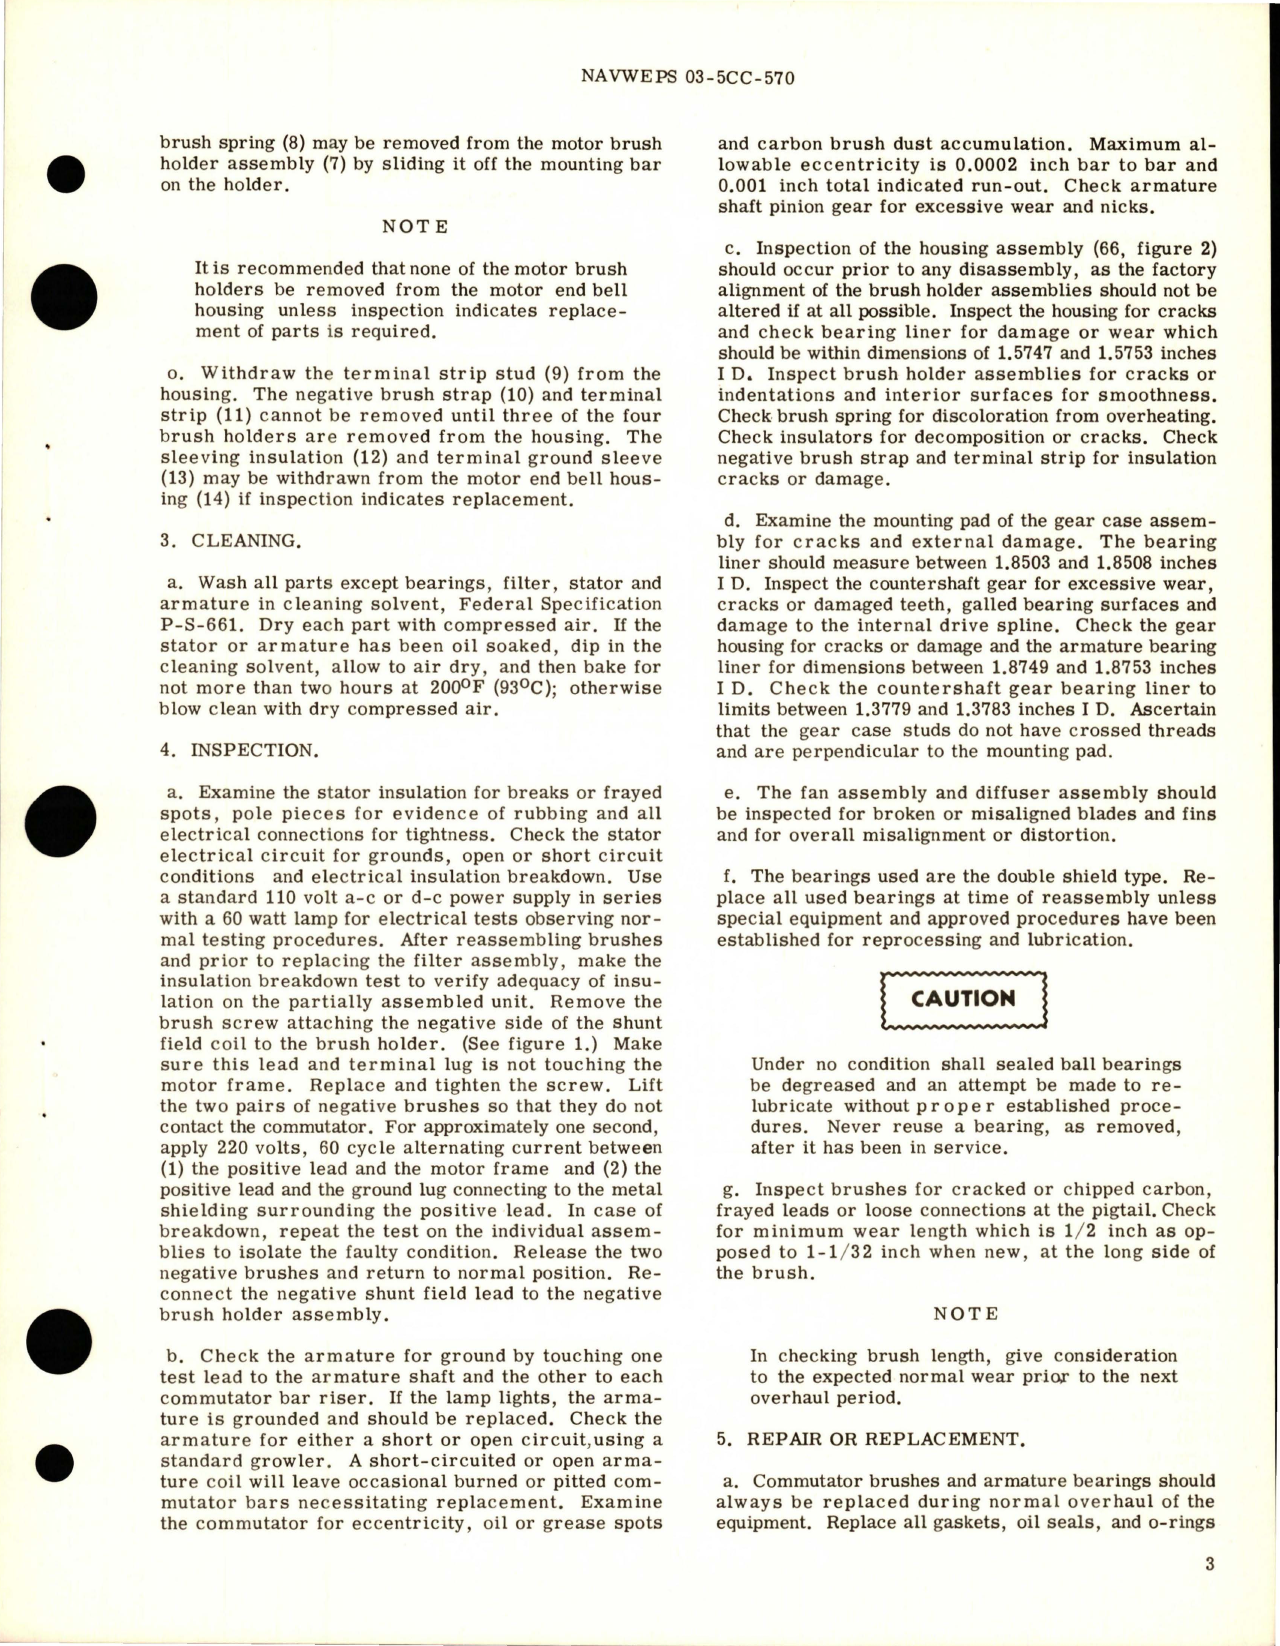 Sample page 5 from AirCorps Library document: Overhaul Instructions with Parts Breakdown for Motor - Models DA37 and DA37-1